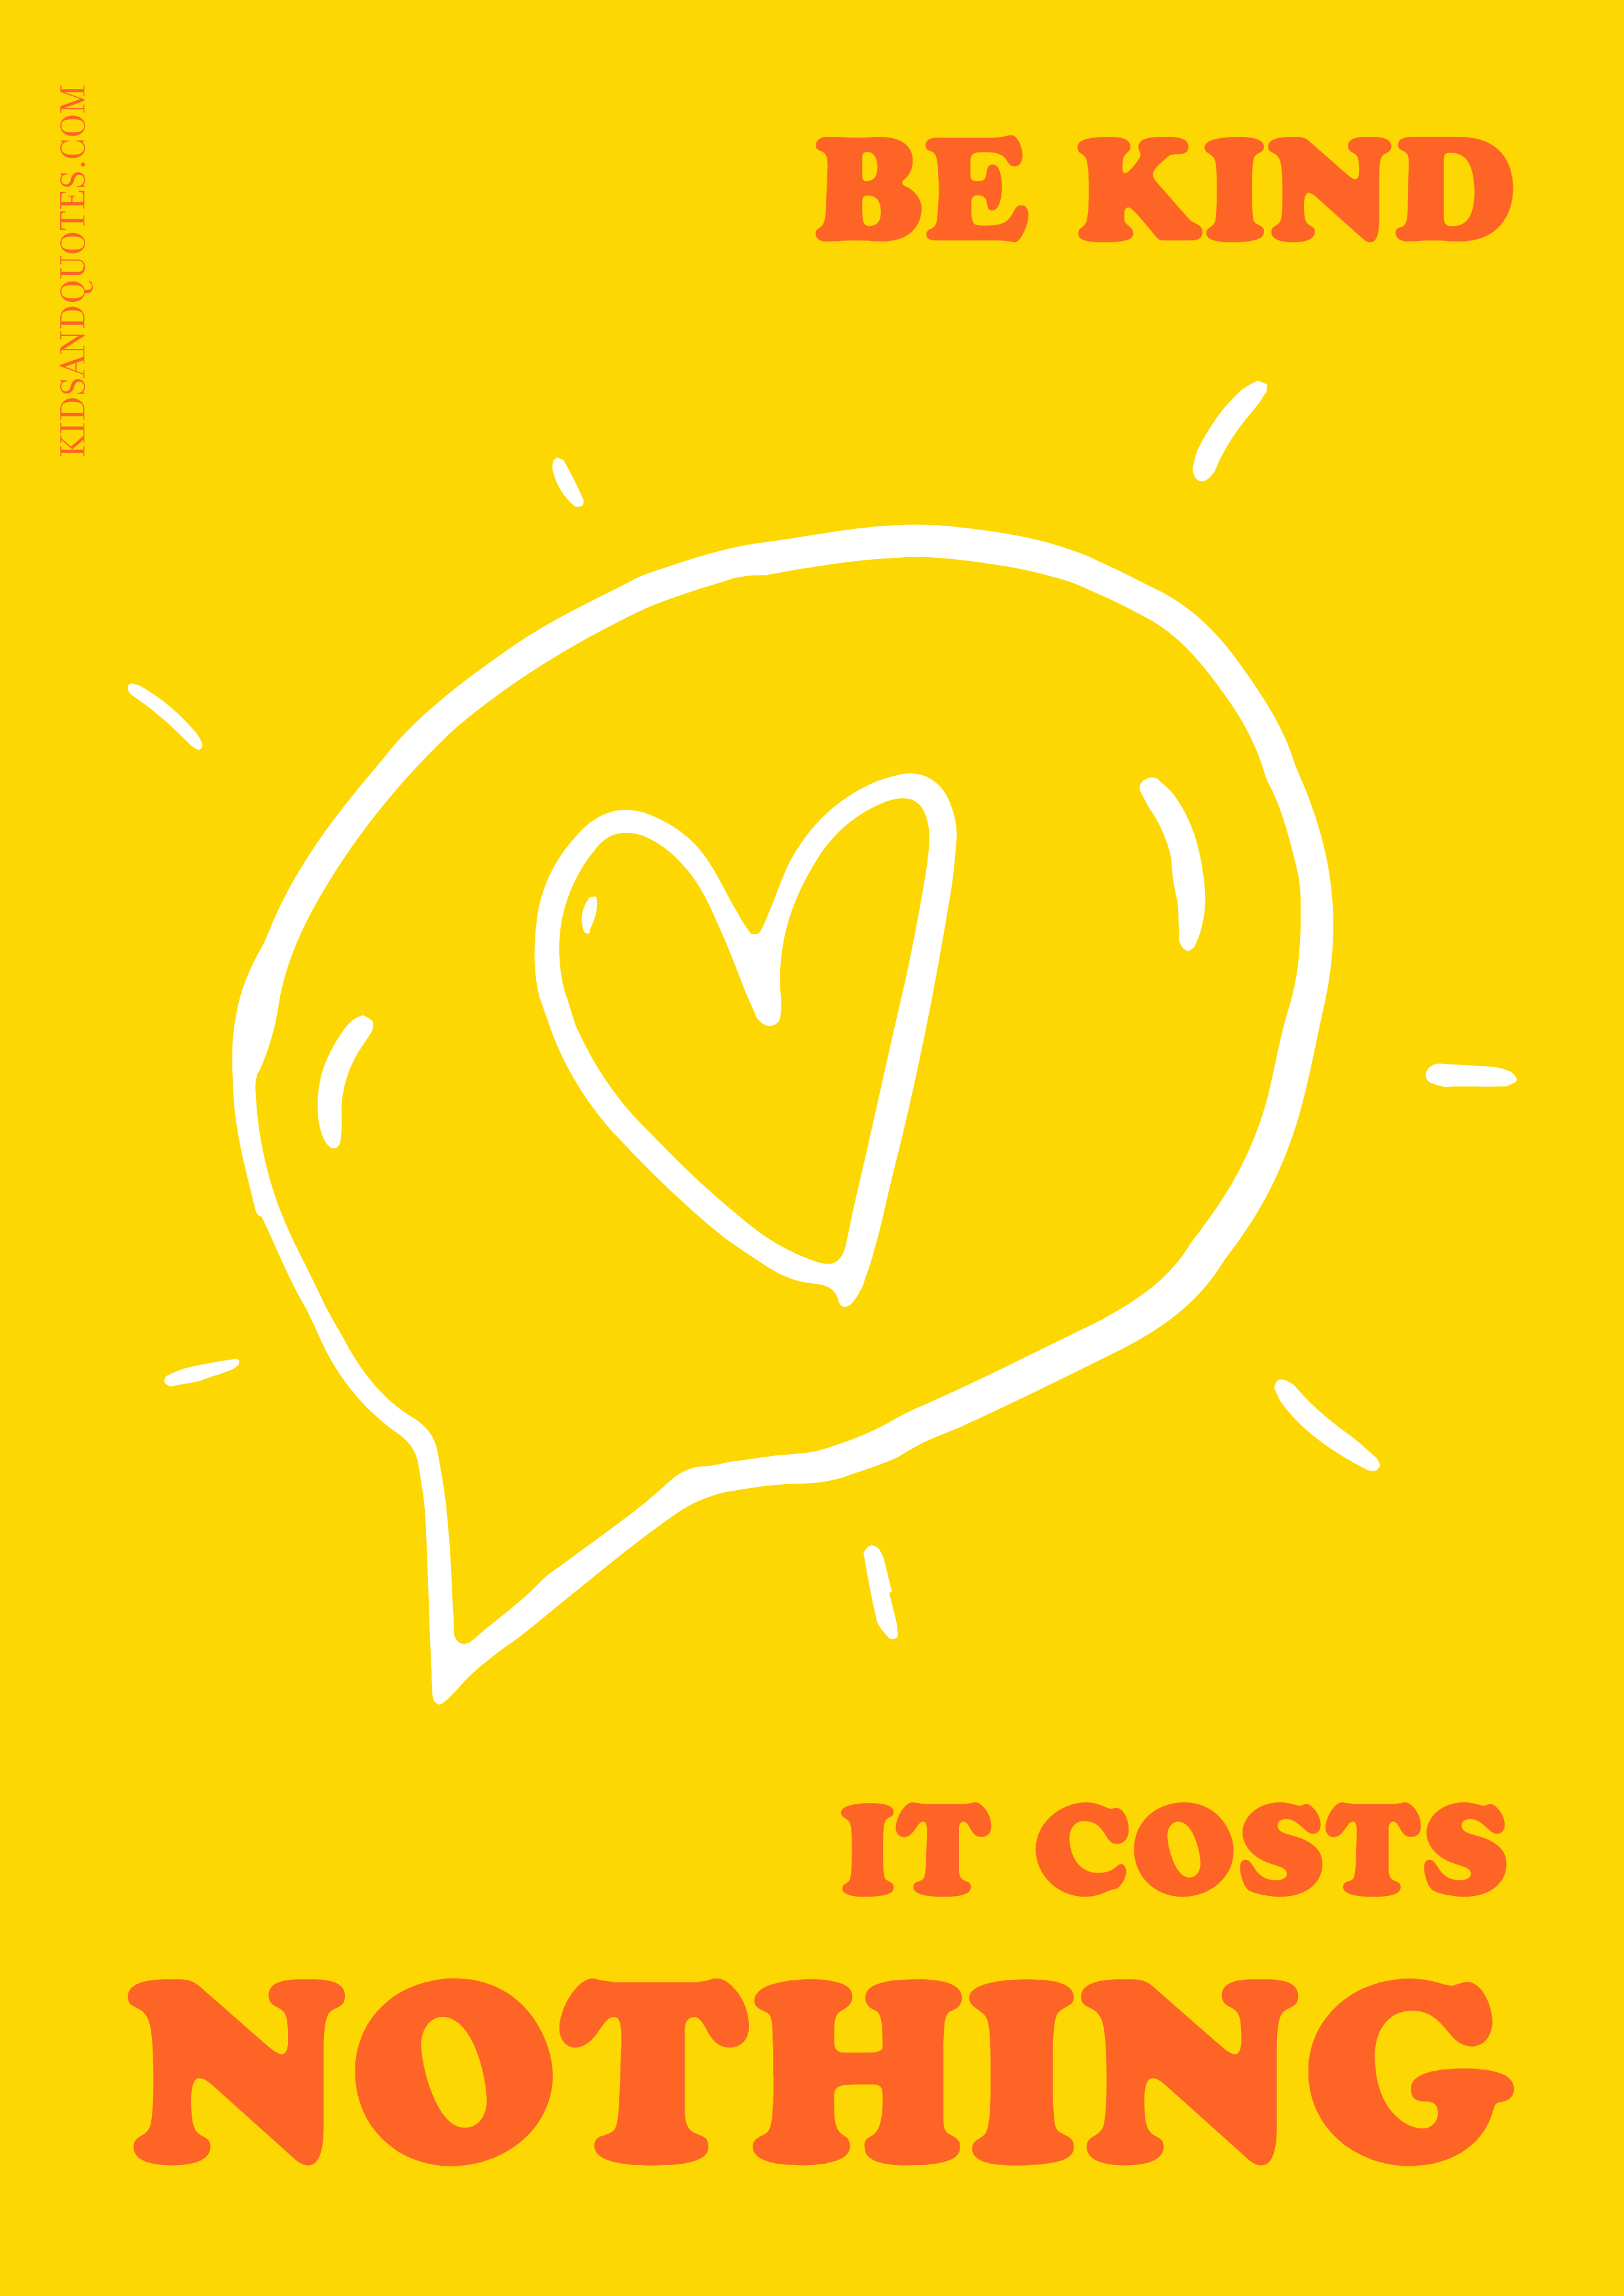 Be kind, it costs nothing - a cool kindness poster